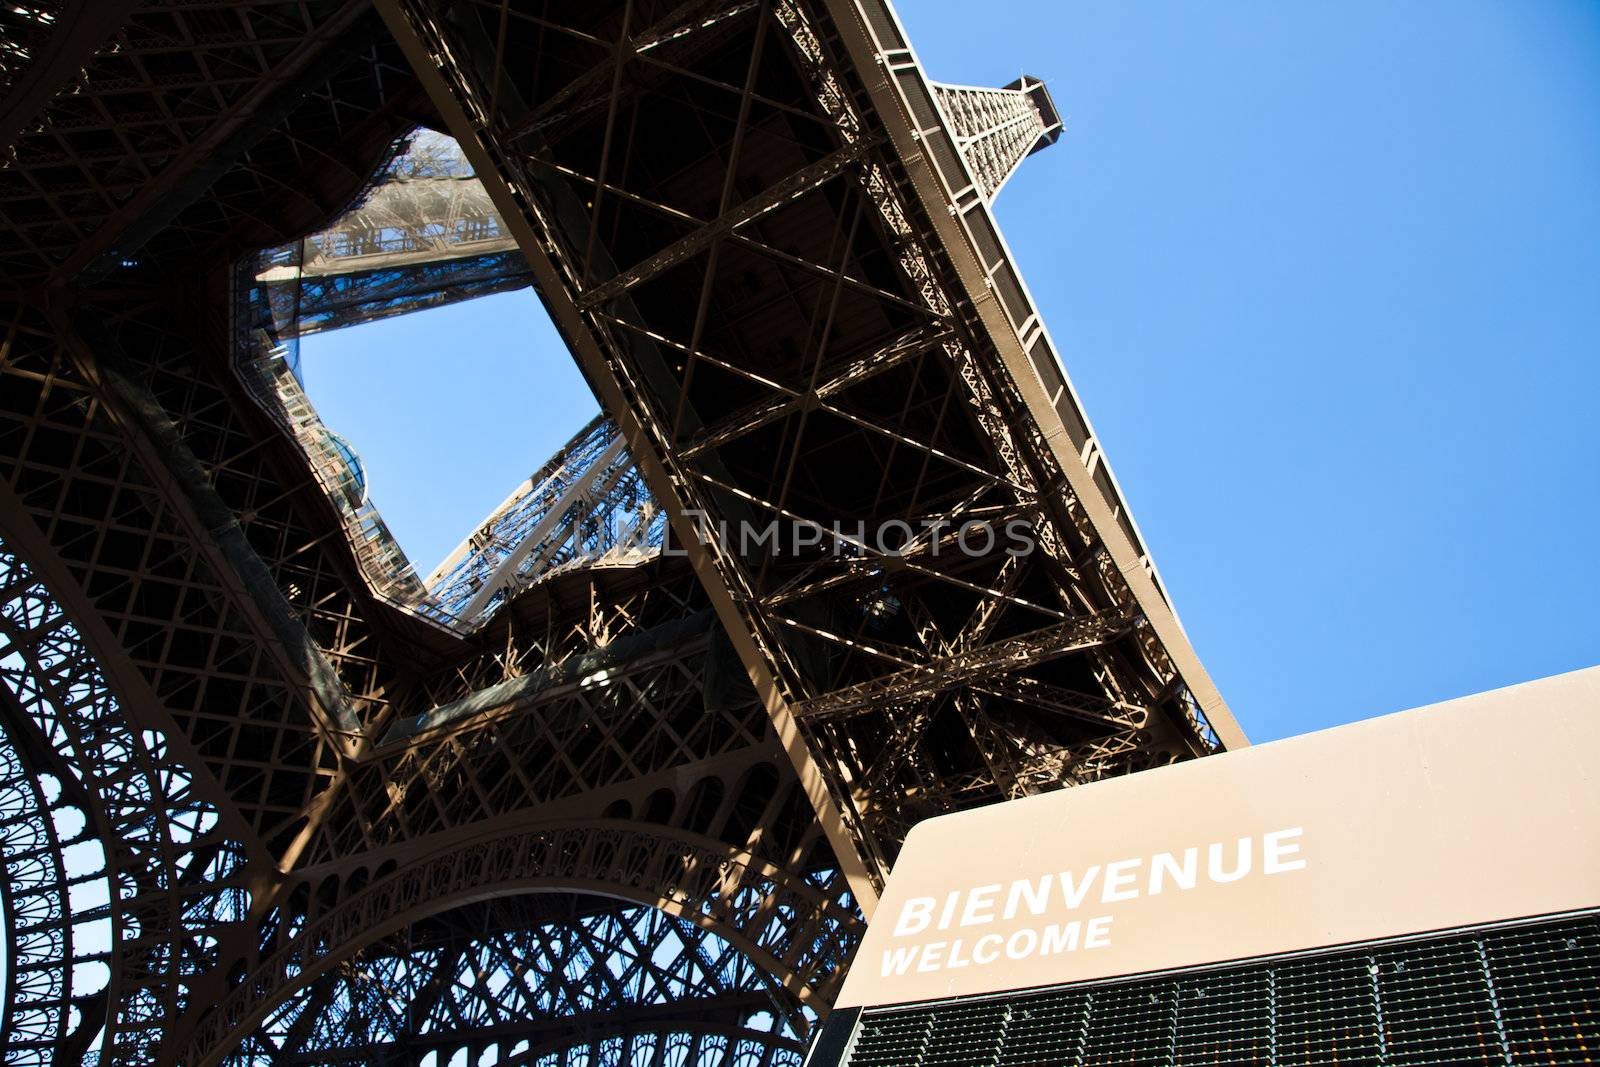 The welcome message at the basement of Eiffel Tower